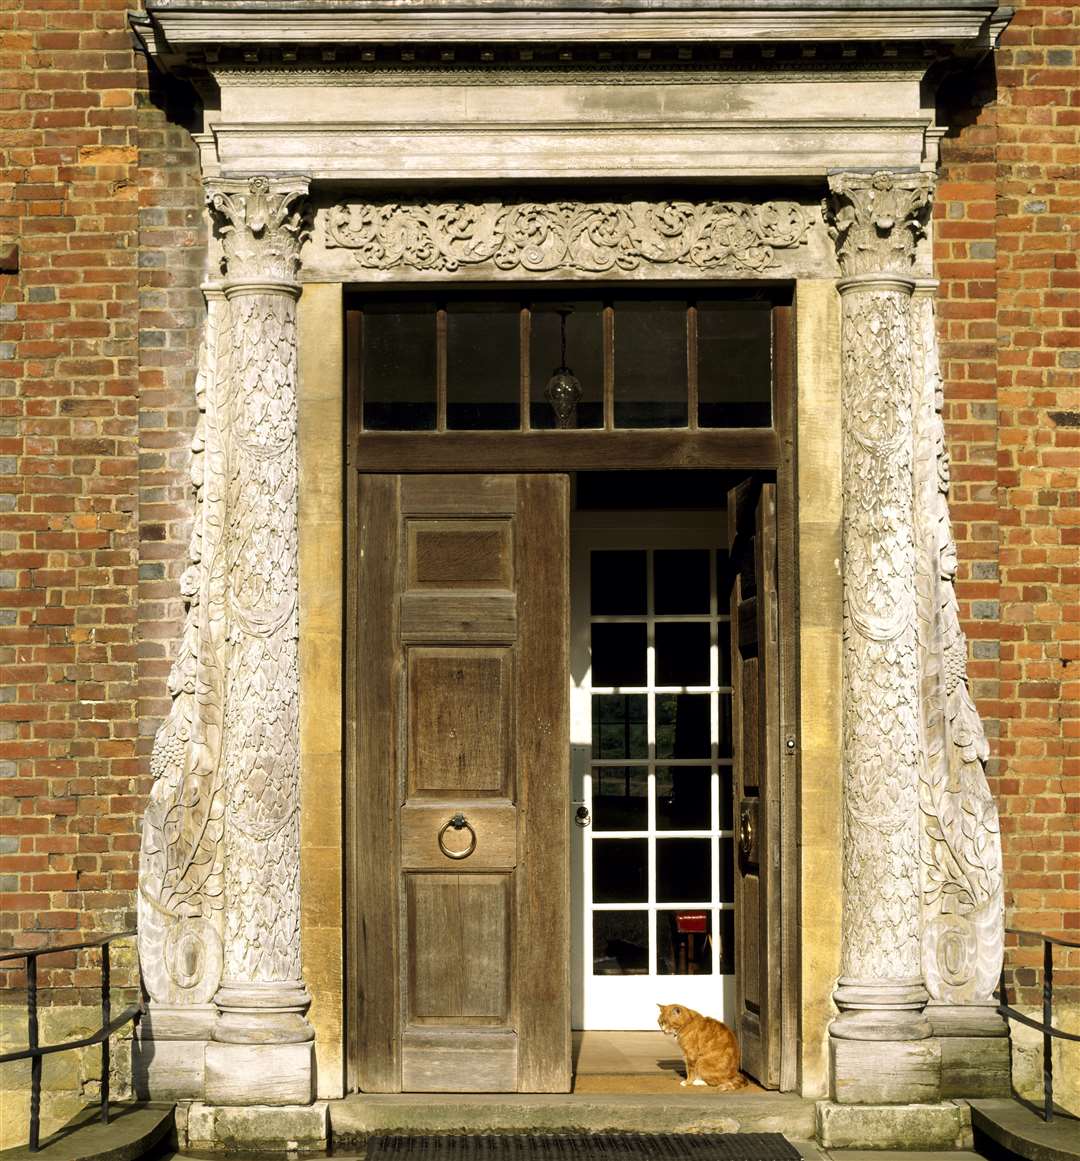 The partly open front door at Chartwell, the home of Sir Winston Churchill, with Jock the cat sitting in the sunshine Picture: National Trust